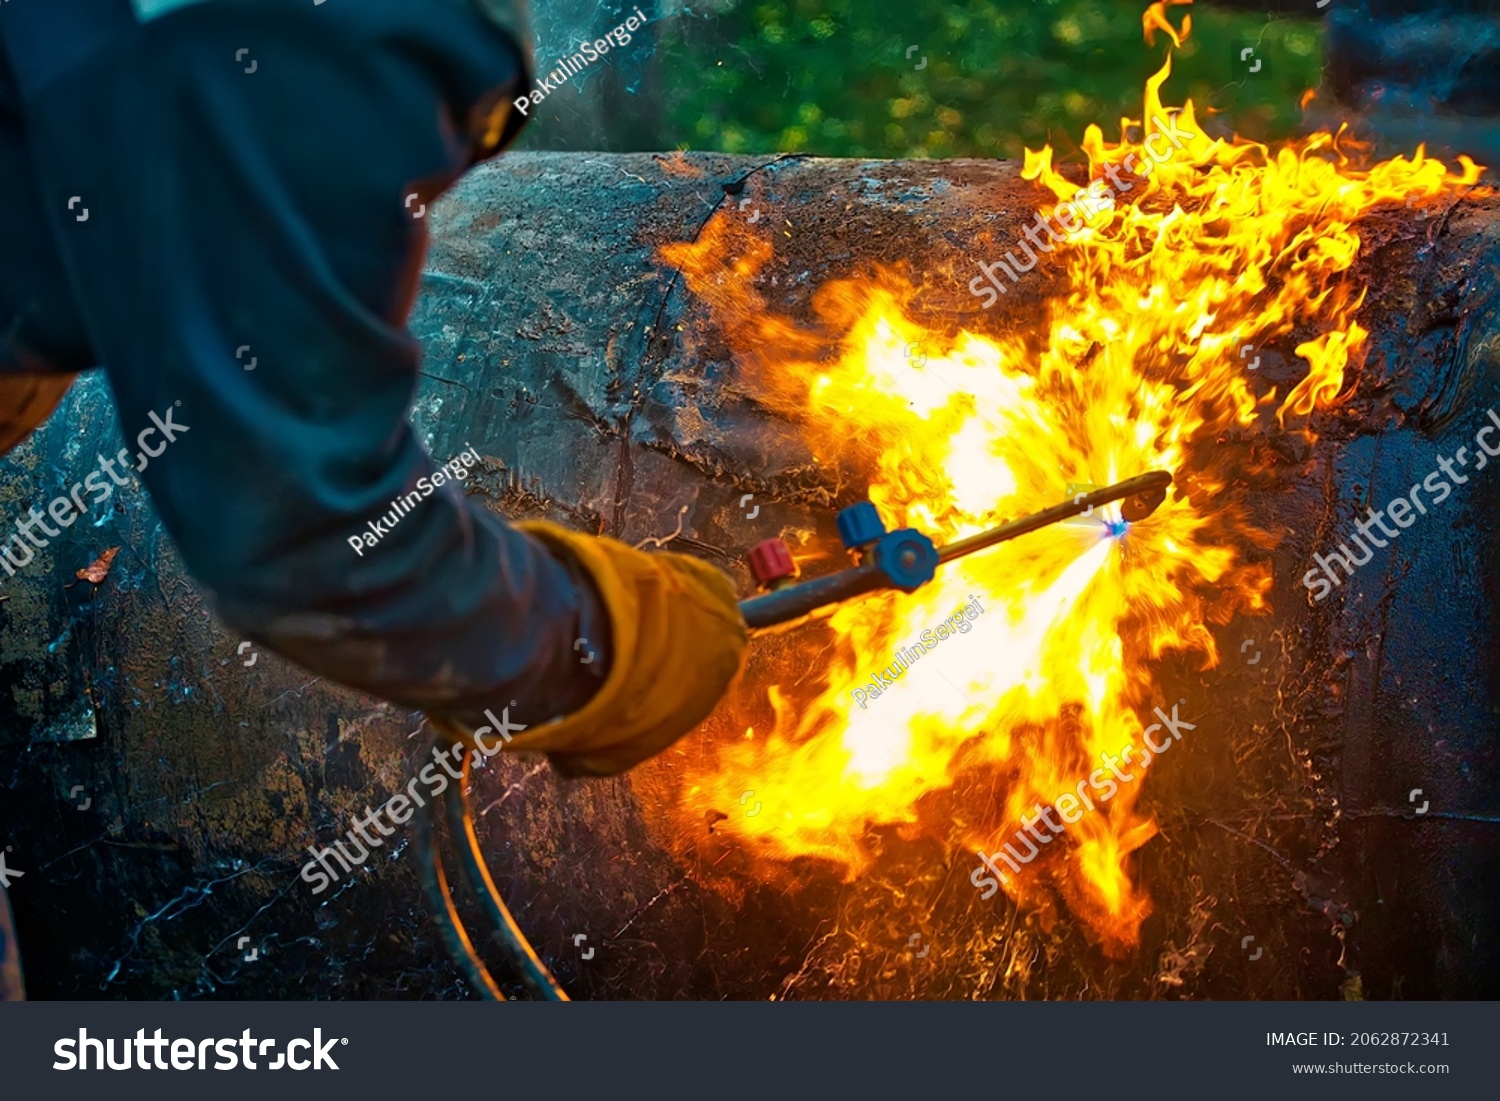 The texture of hot metal from acetylene welding. Welder's hands in protective gloves during operation. Cutting a metal pipe outside during the day. #2062872341